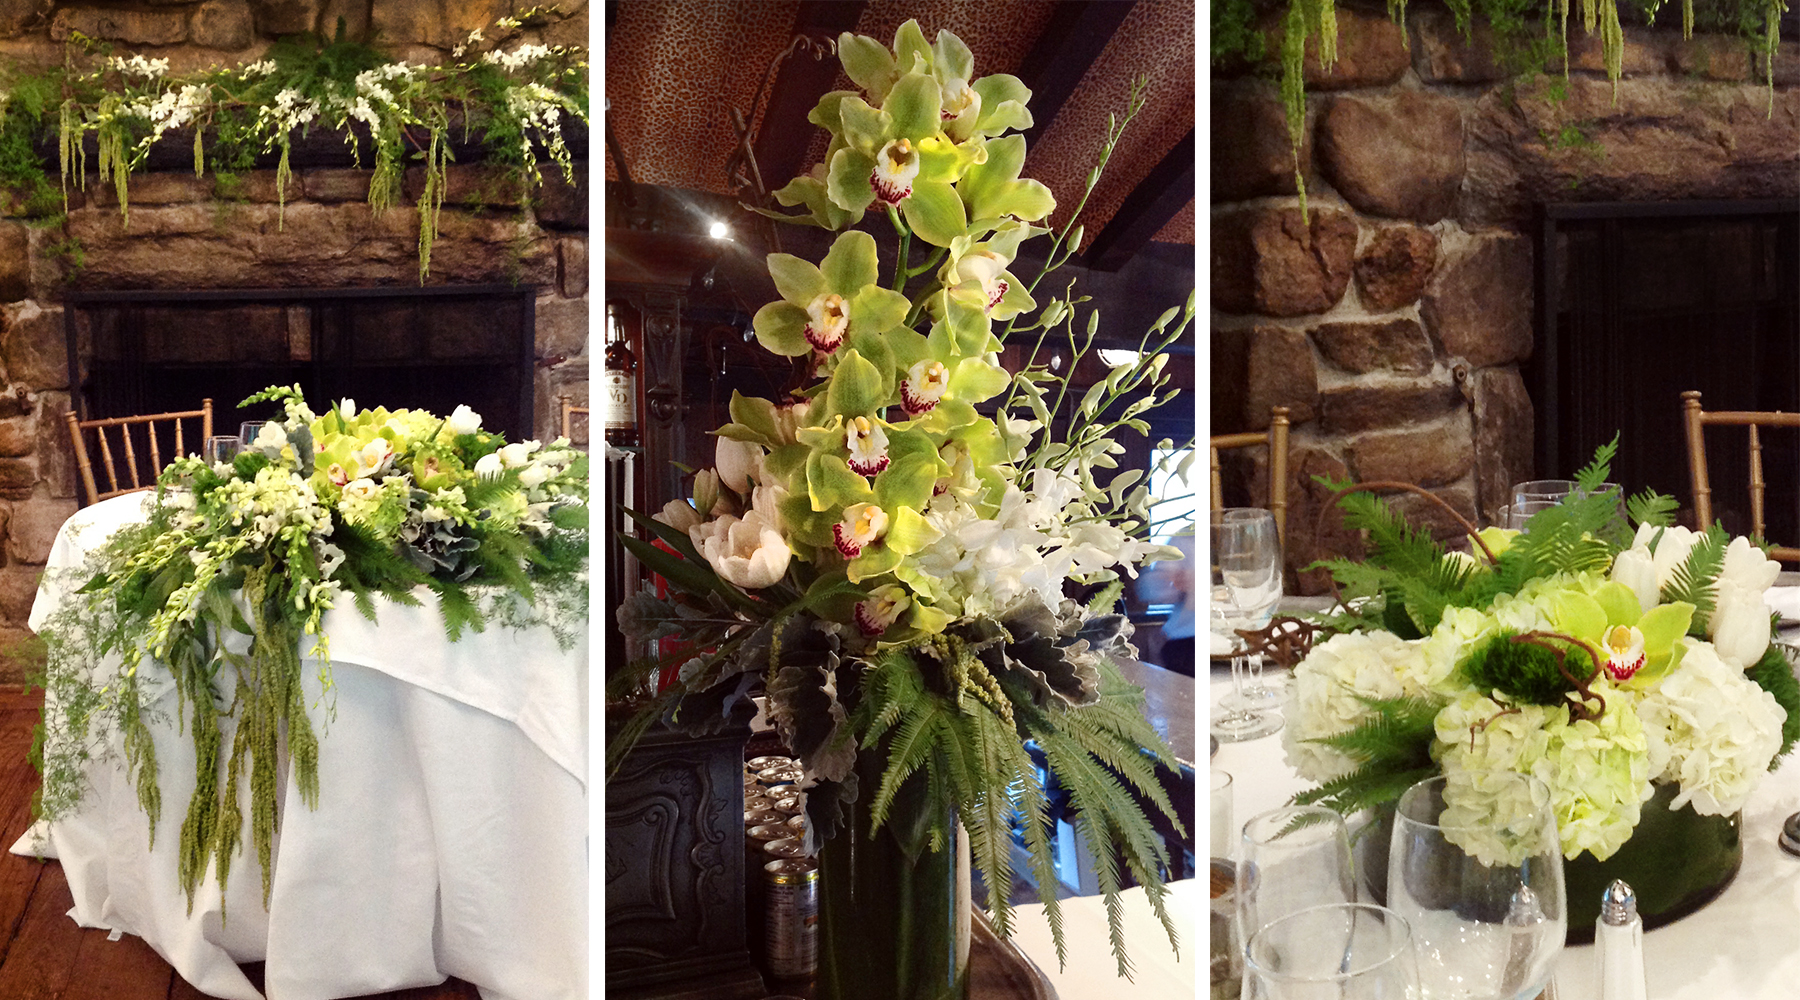 Palmer's Weddings & Events - Catering, Flowers, Cakes, Decor and more!